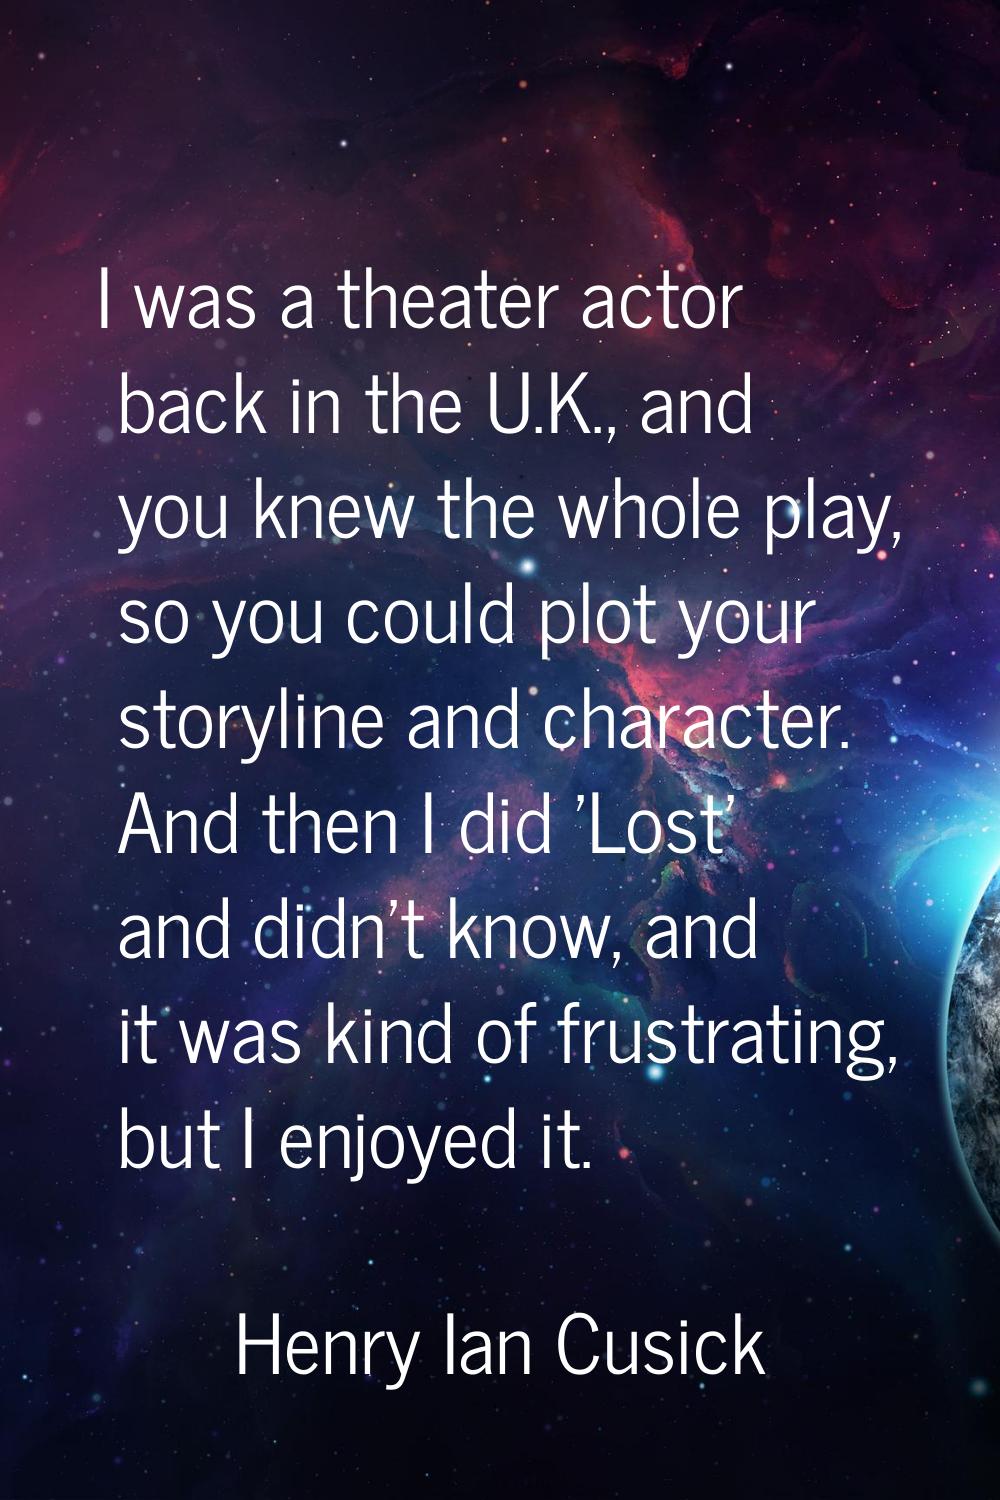 I was a theater actor back in the U.K., and you knew the whole play, so you could plot your storyli